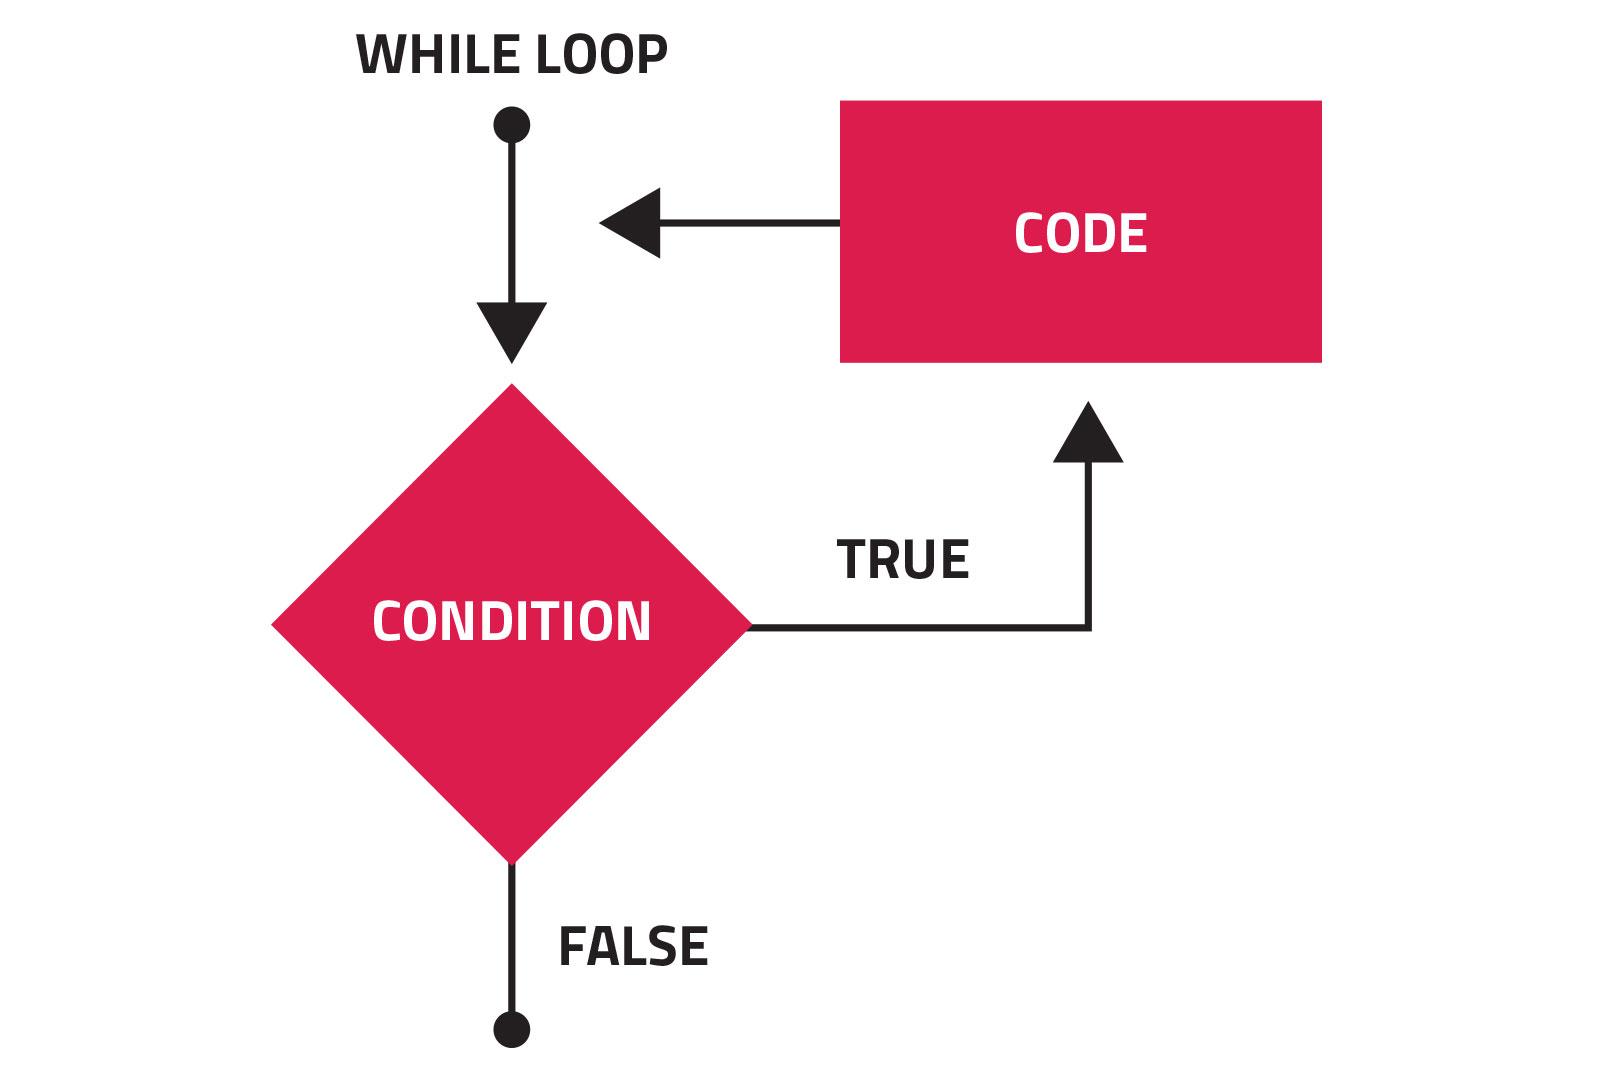 The While Loop